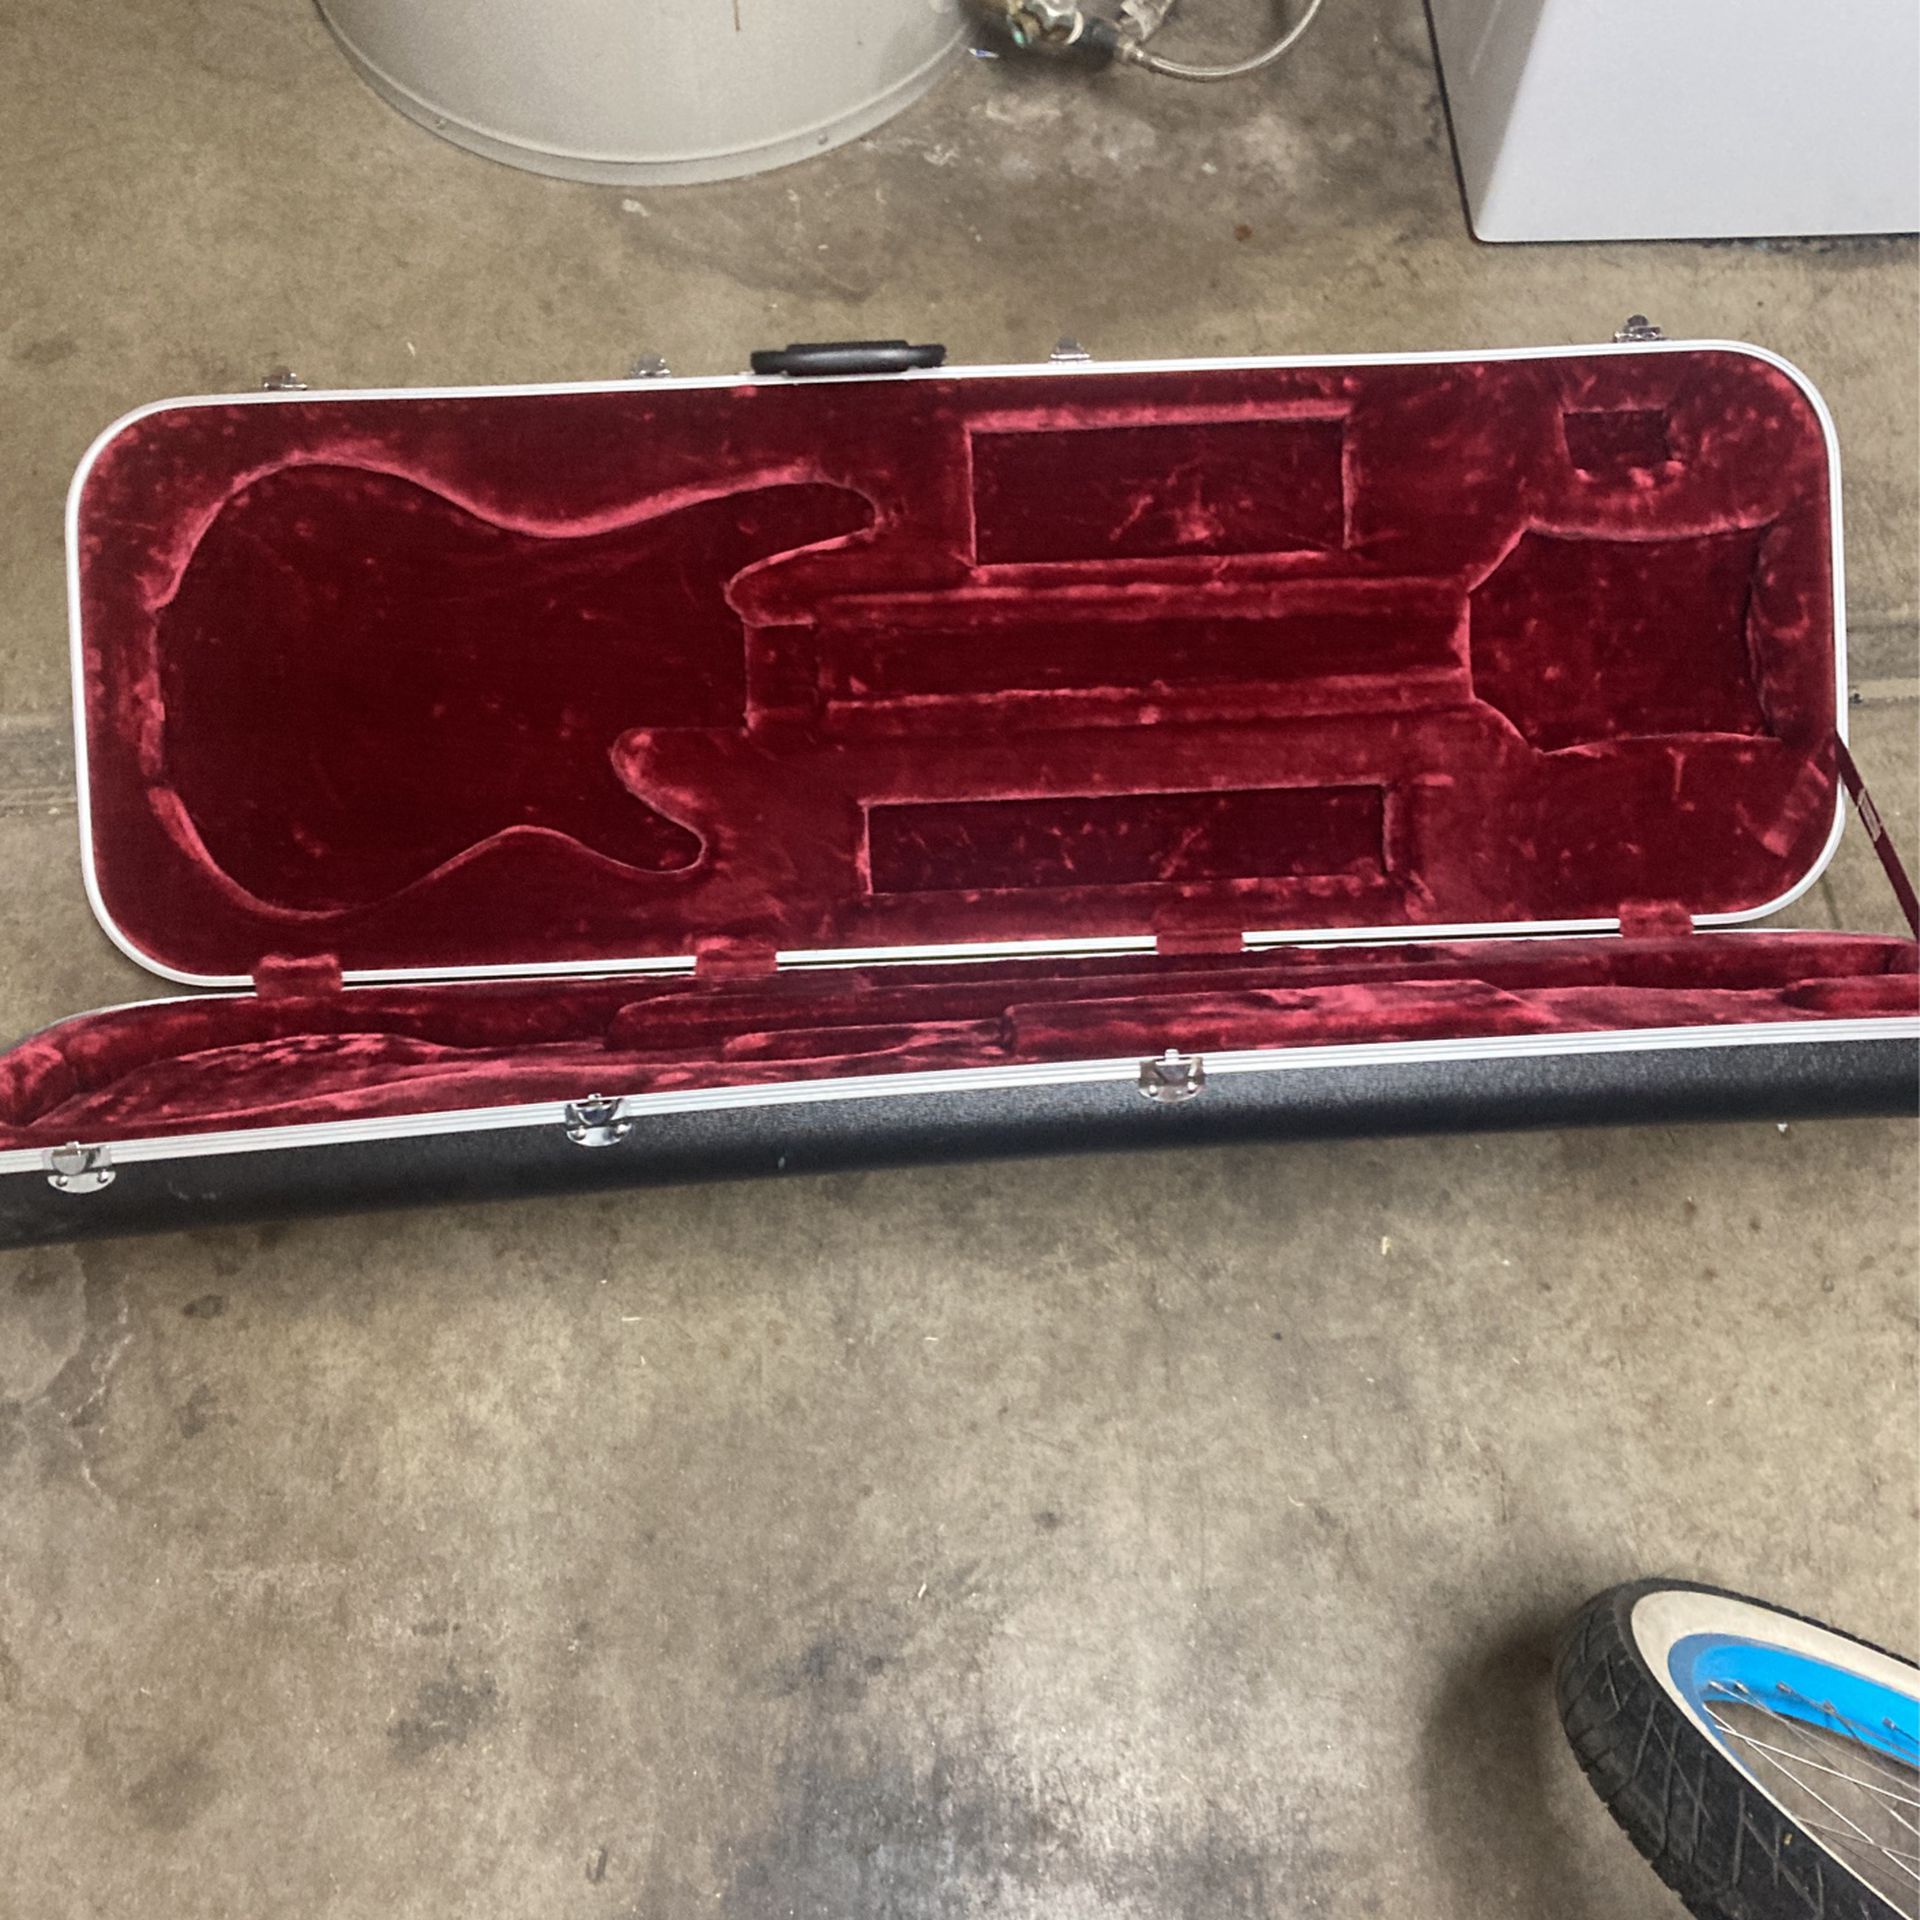 Ibanez FRS-90 Electric Guitar Case 